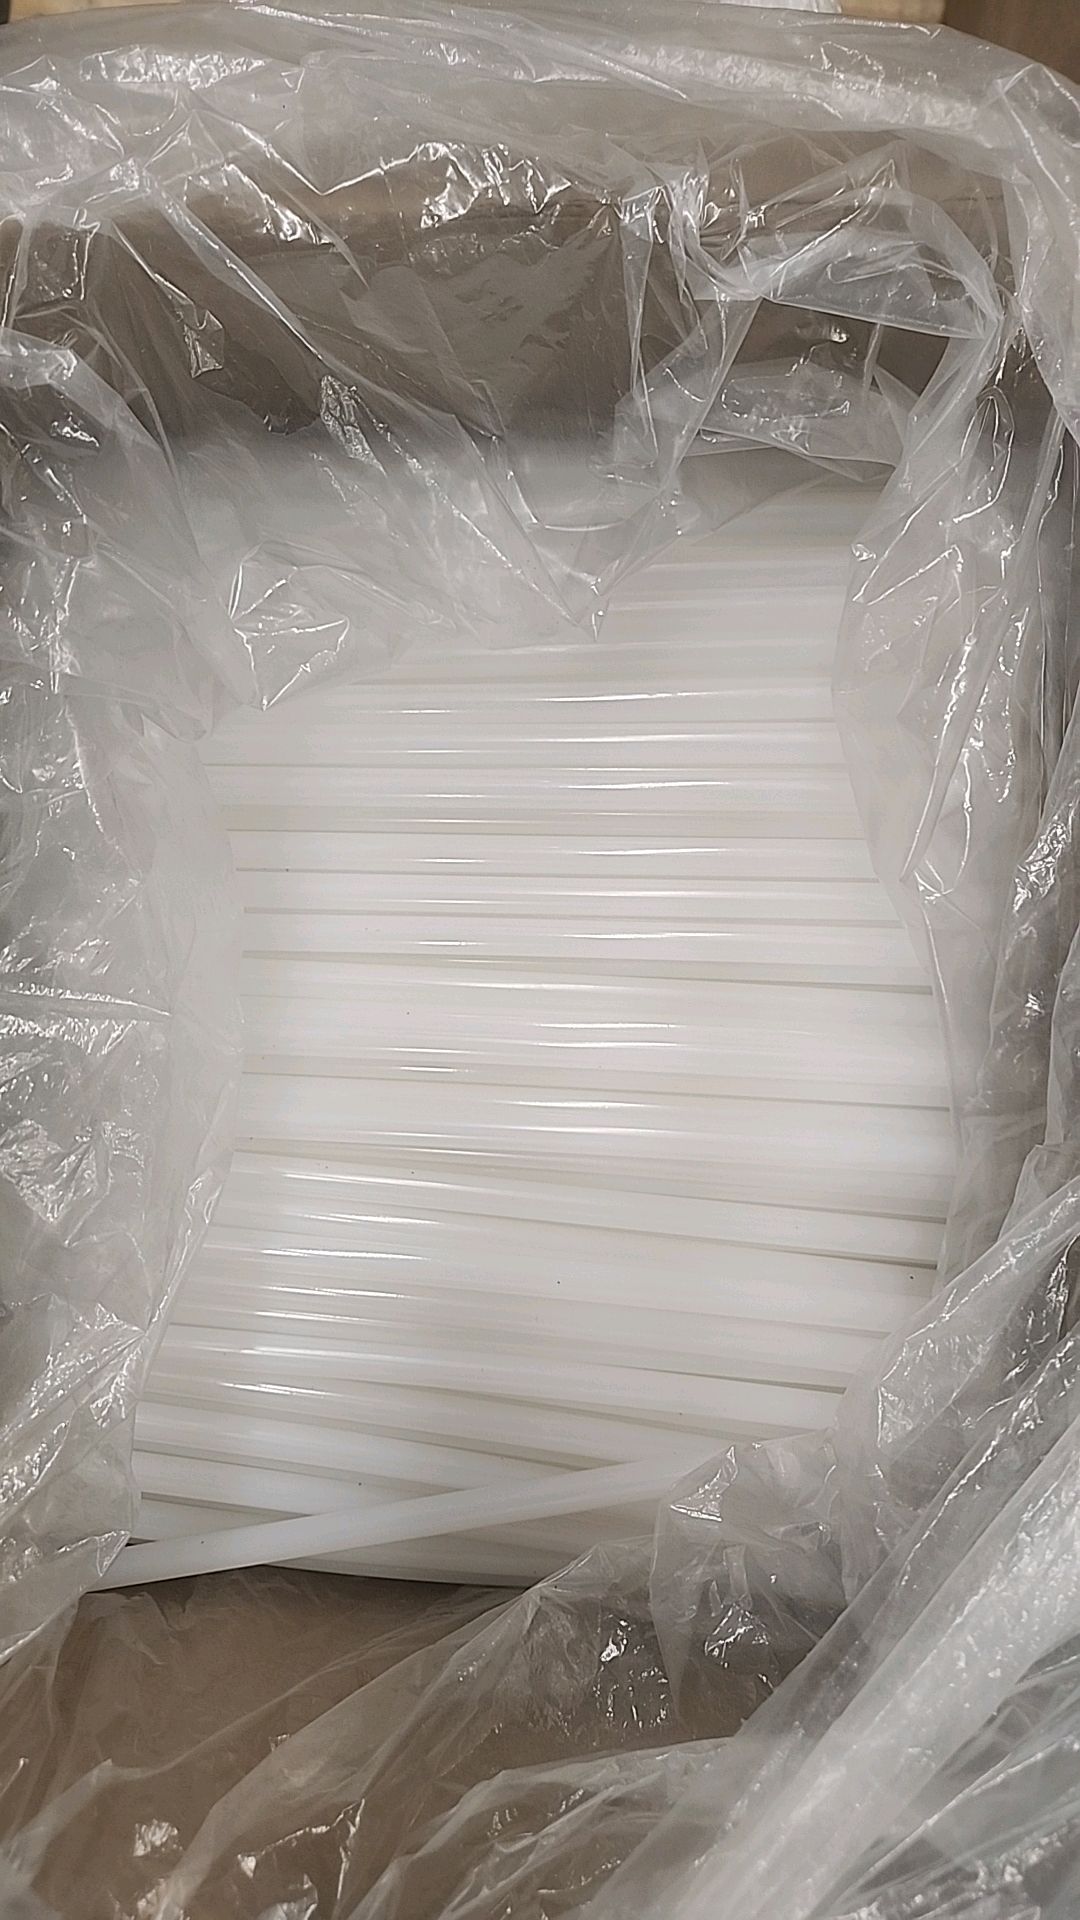 (1 pallet/6 boxes) GS101 glue sticks [Loc.Finished Goods Shipping/Receiving] - Image 2 of 3